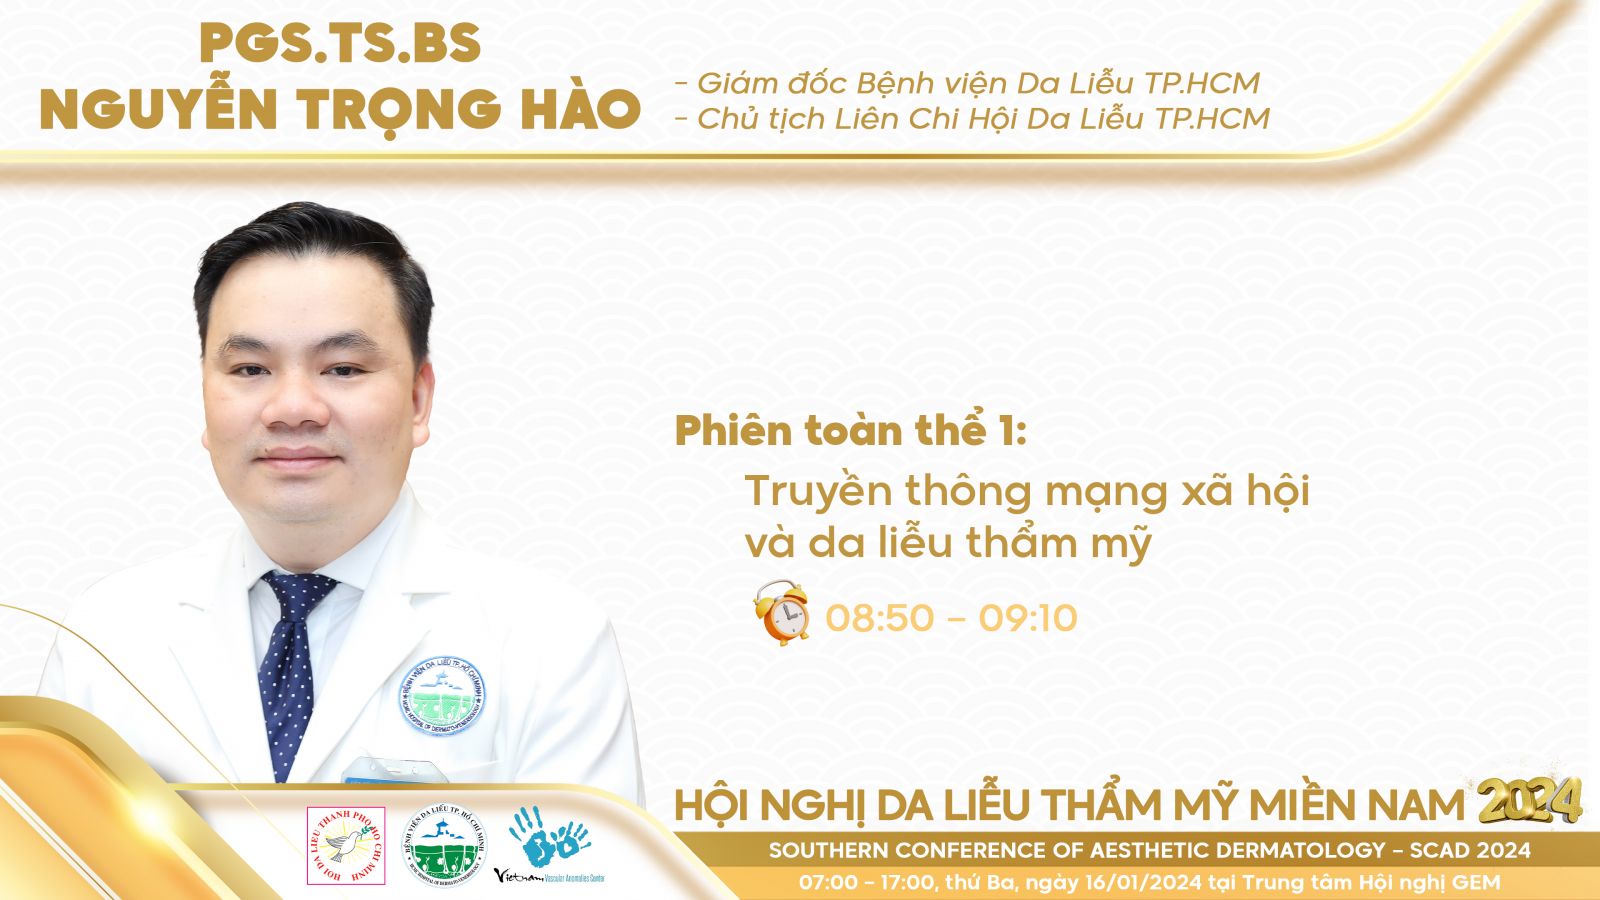 bvdl-hn-scad-2024-gioi-thieu-phien-toan-the-1-bs-hao